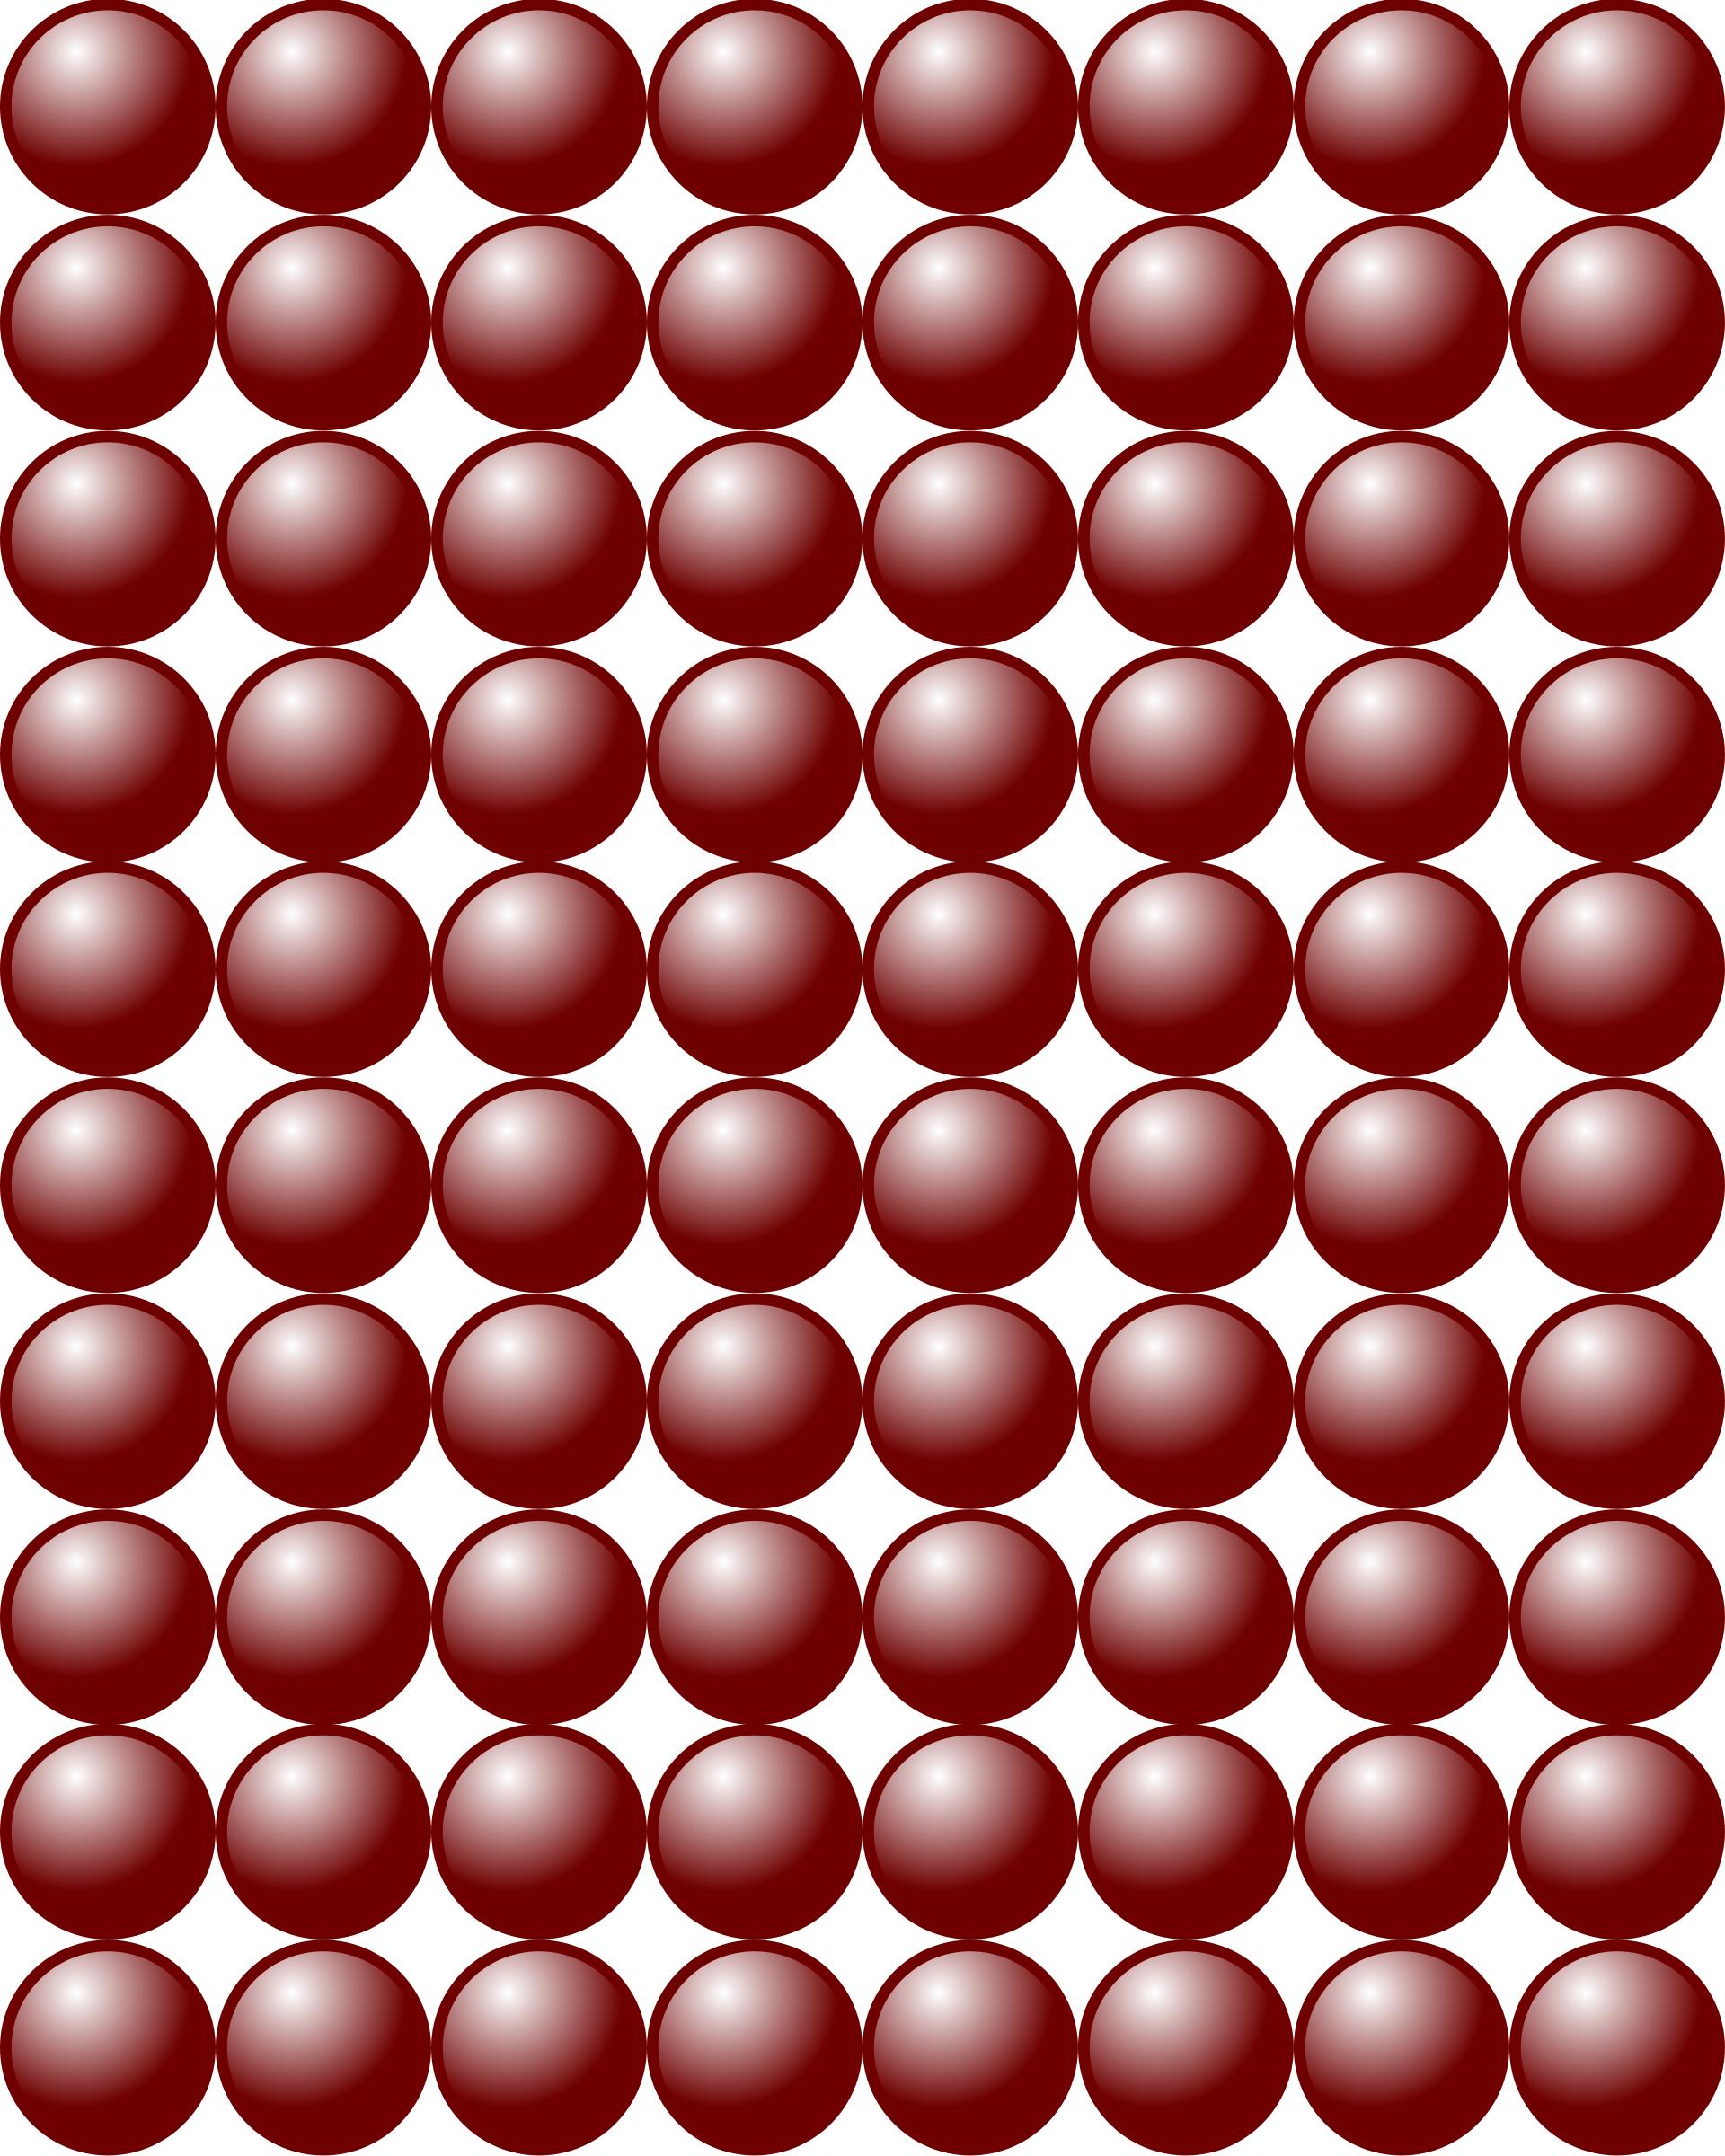 Beads quantitative picture for multiplication 10x8 png